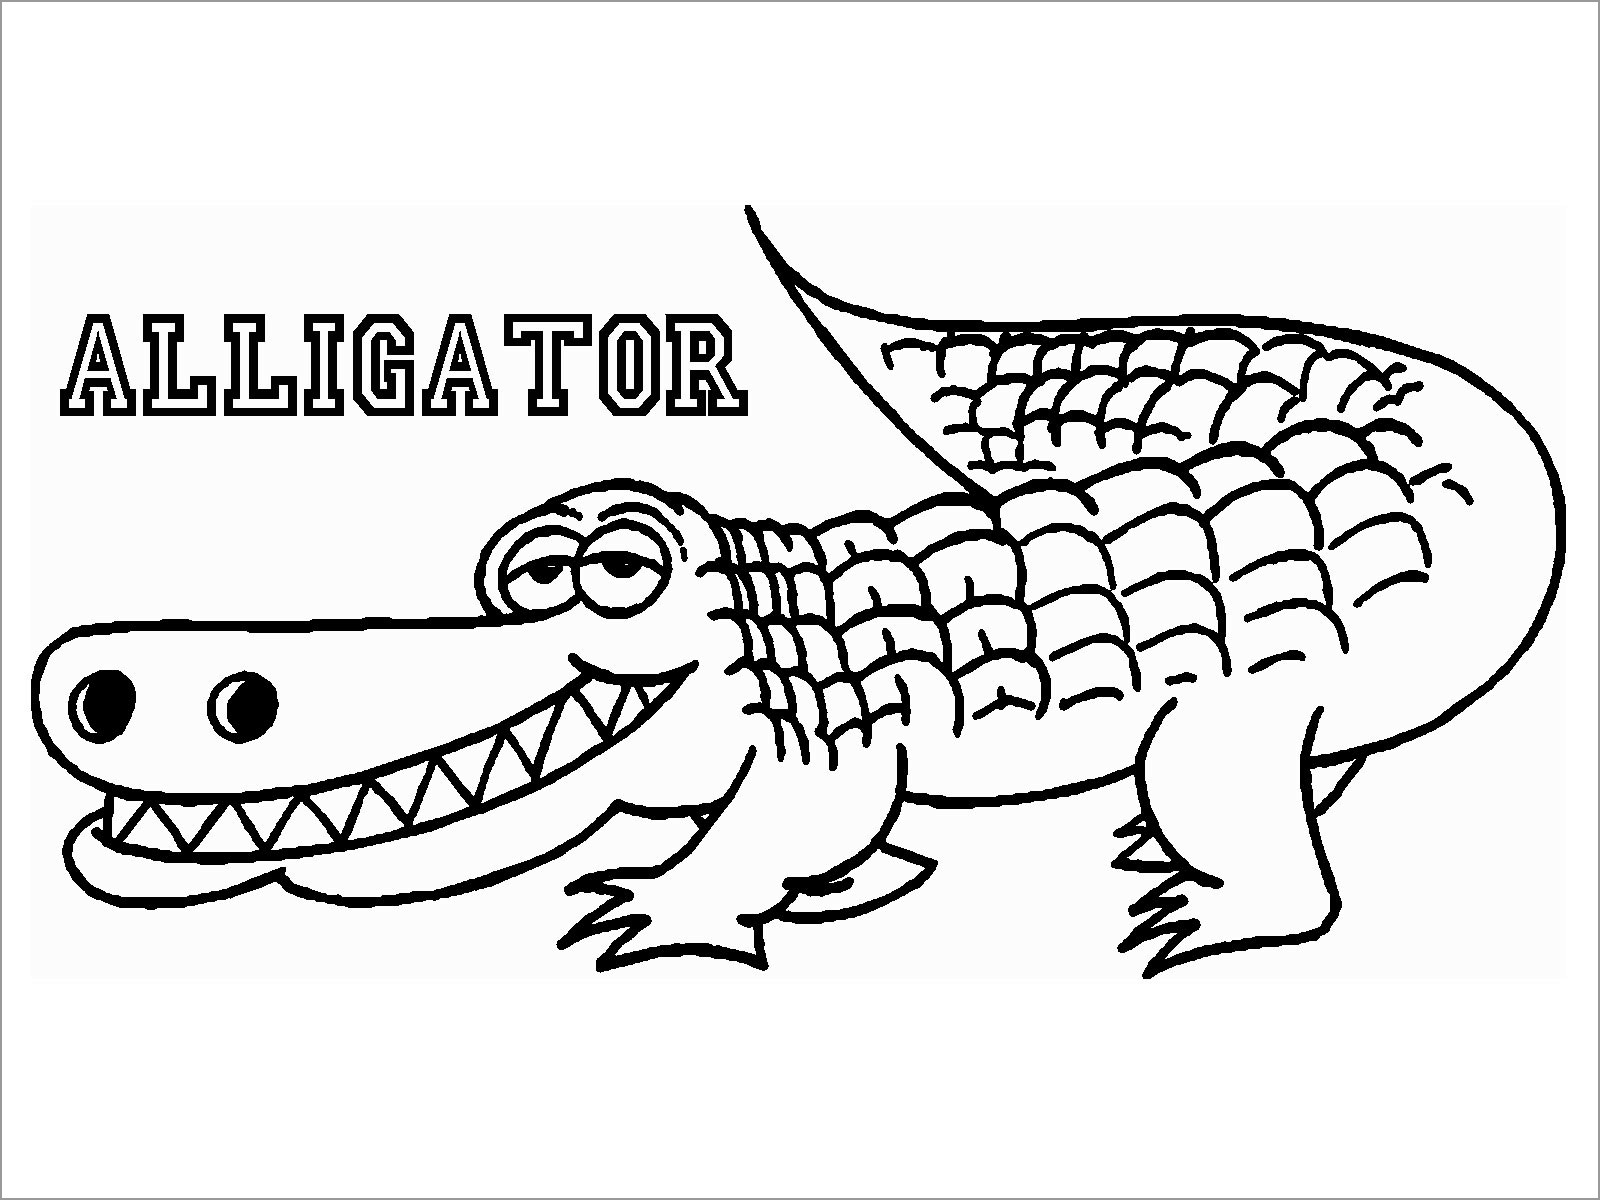 Alligator Coloring Pages for toddlers